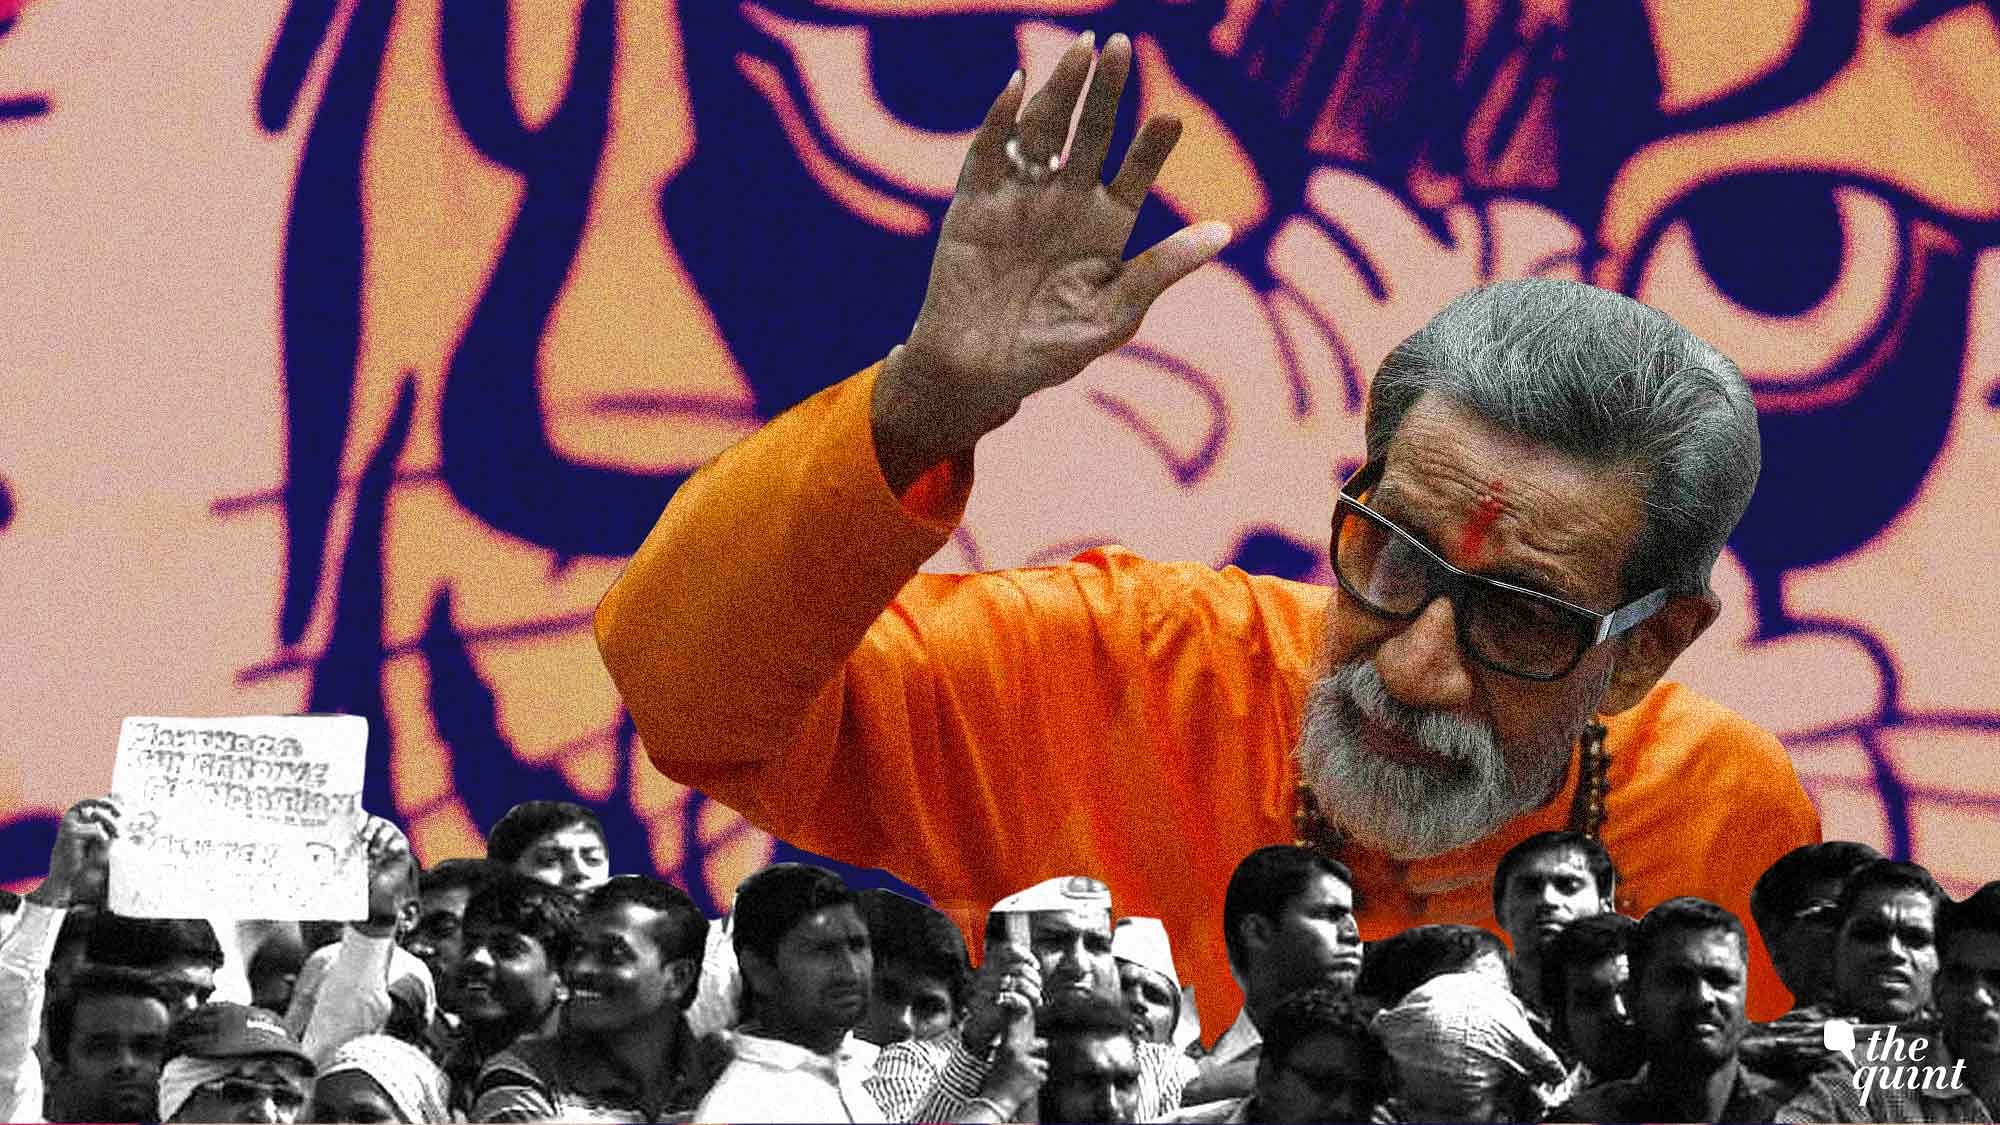 To project Thackeray as the city’s saviour calls for a leap in imagination, writes Smruti Koppikar.&nbsp;